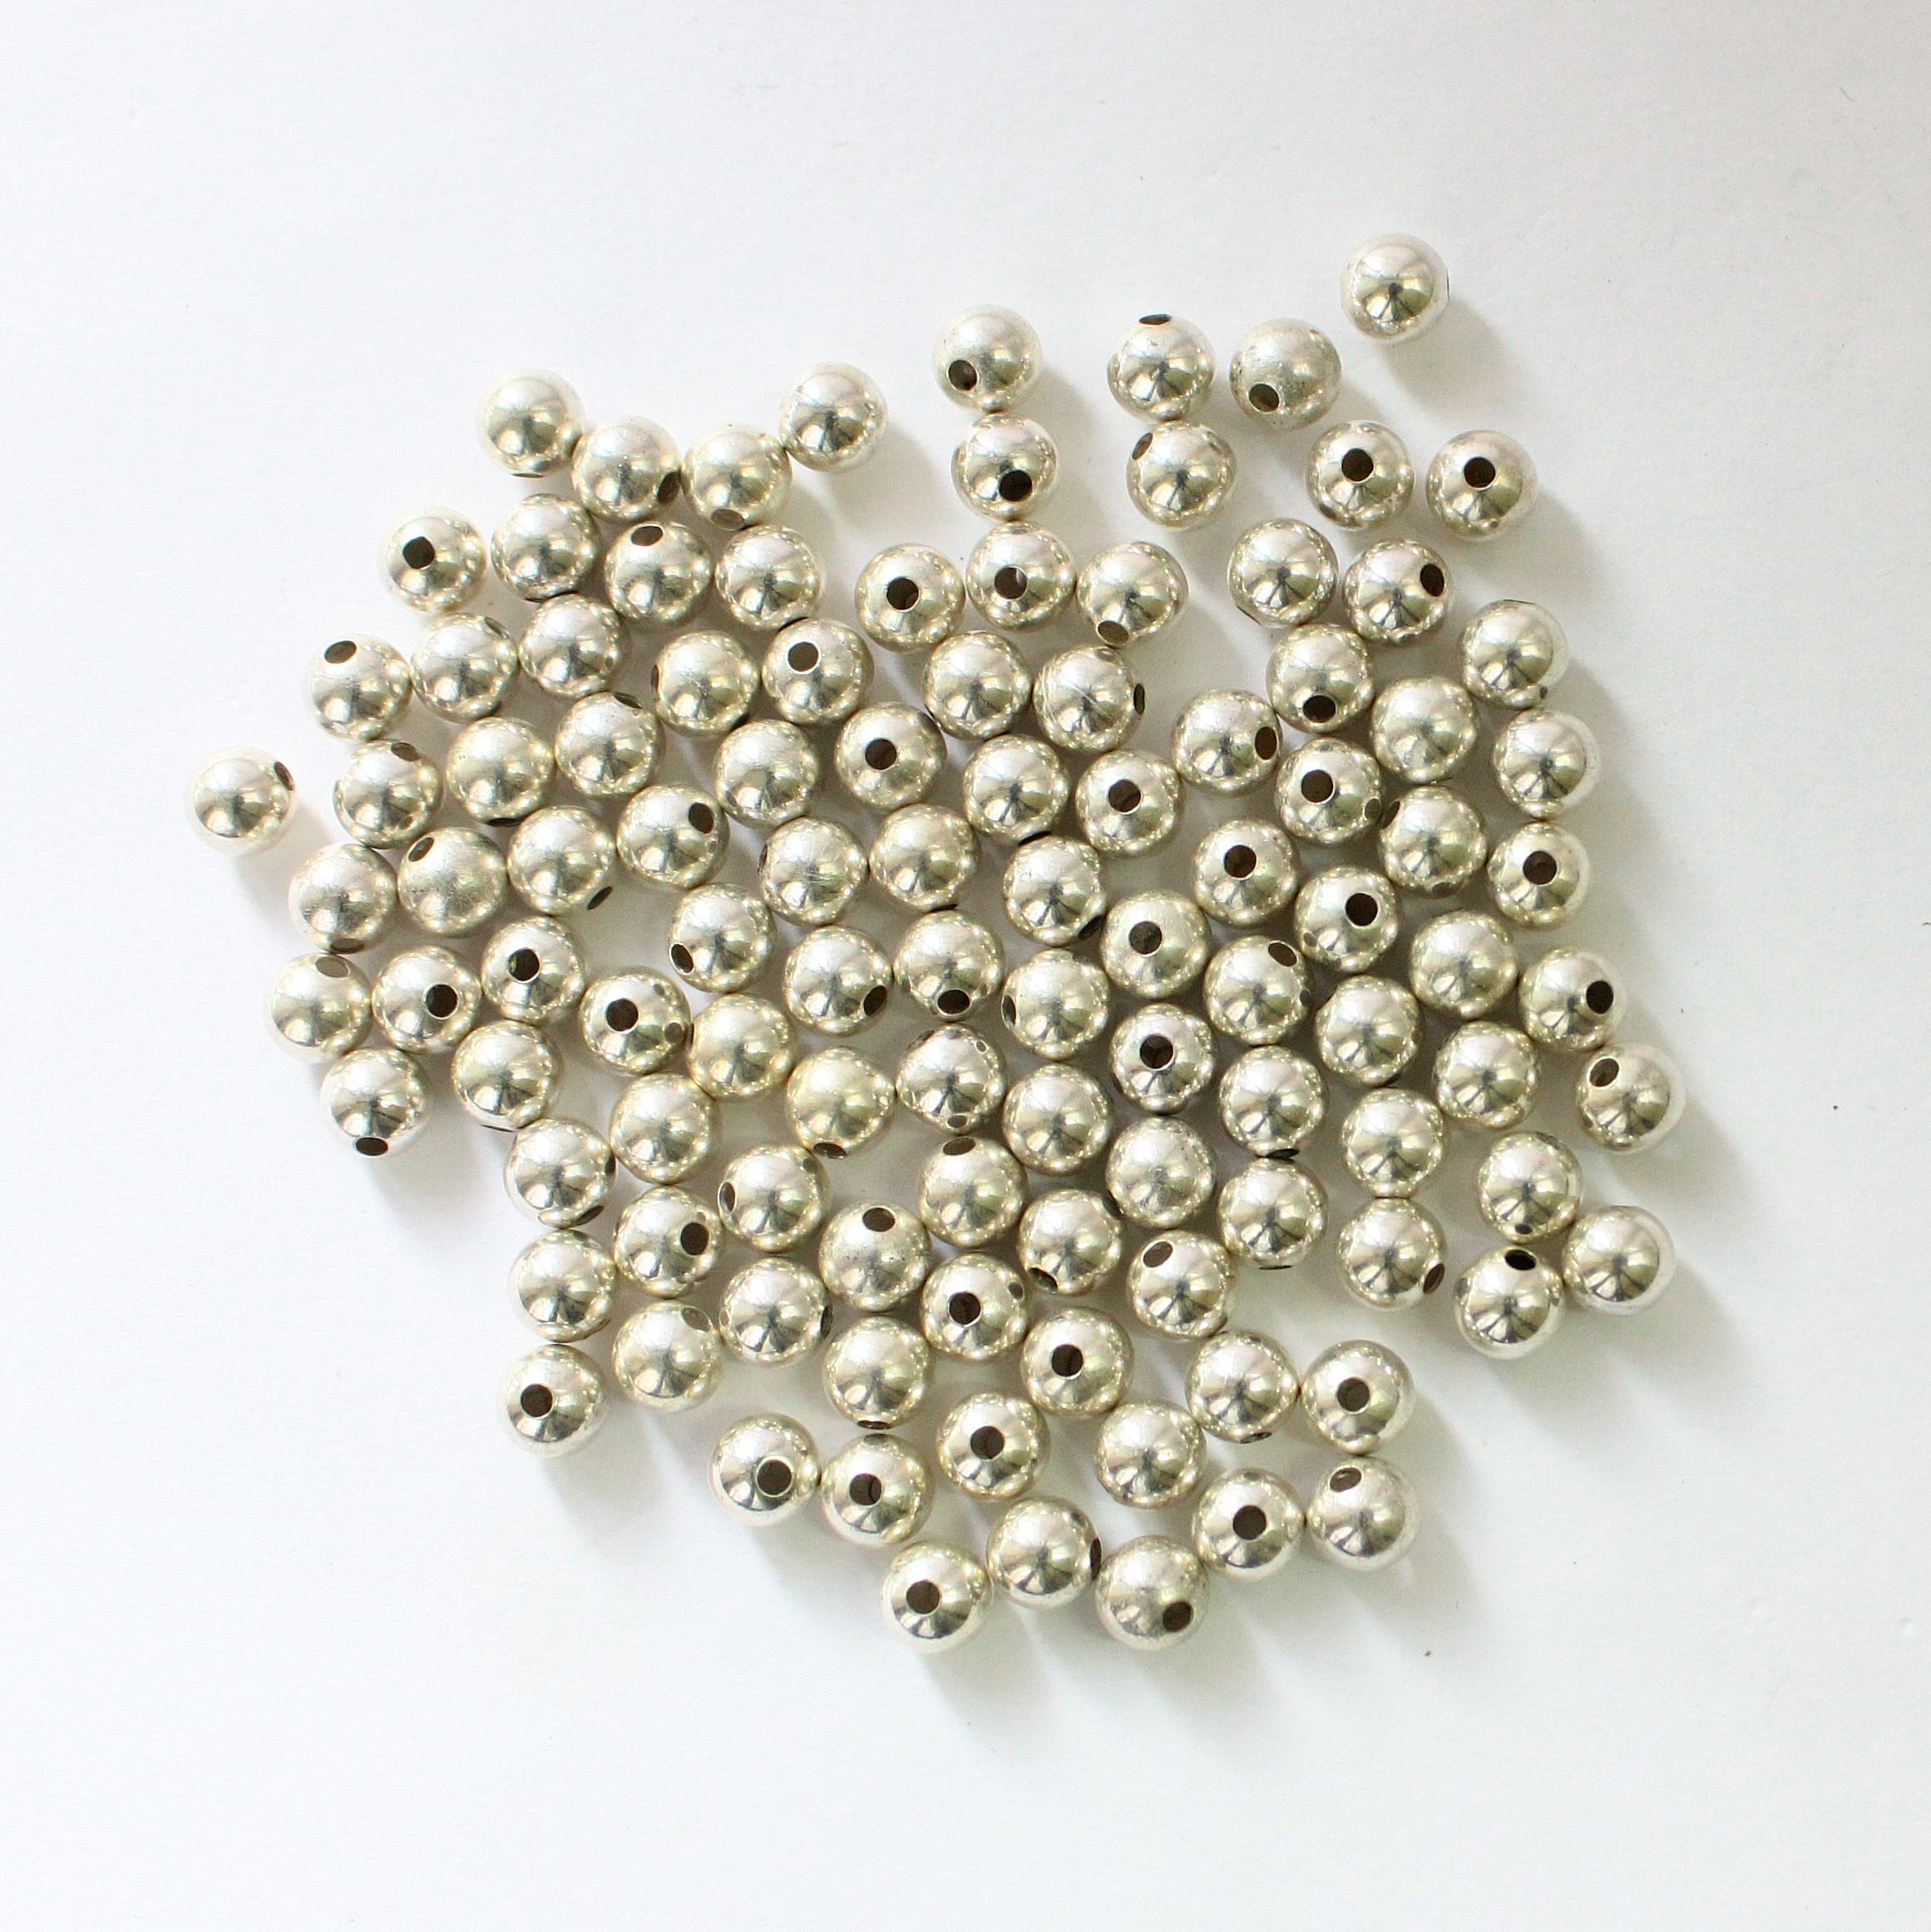 Silver Spacer Beads, Silver Beads, Sterling Silver Bead, Metal Beads, Silver Flatten Beads, Jewelry Supplies